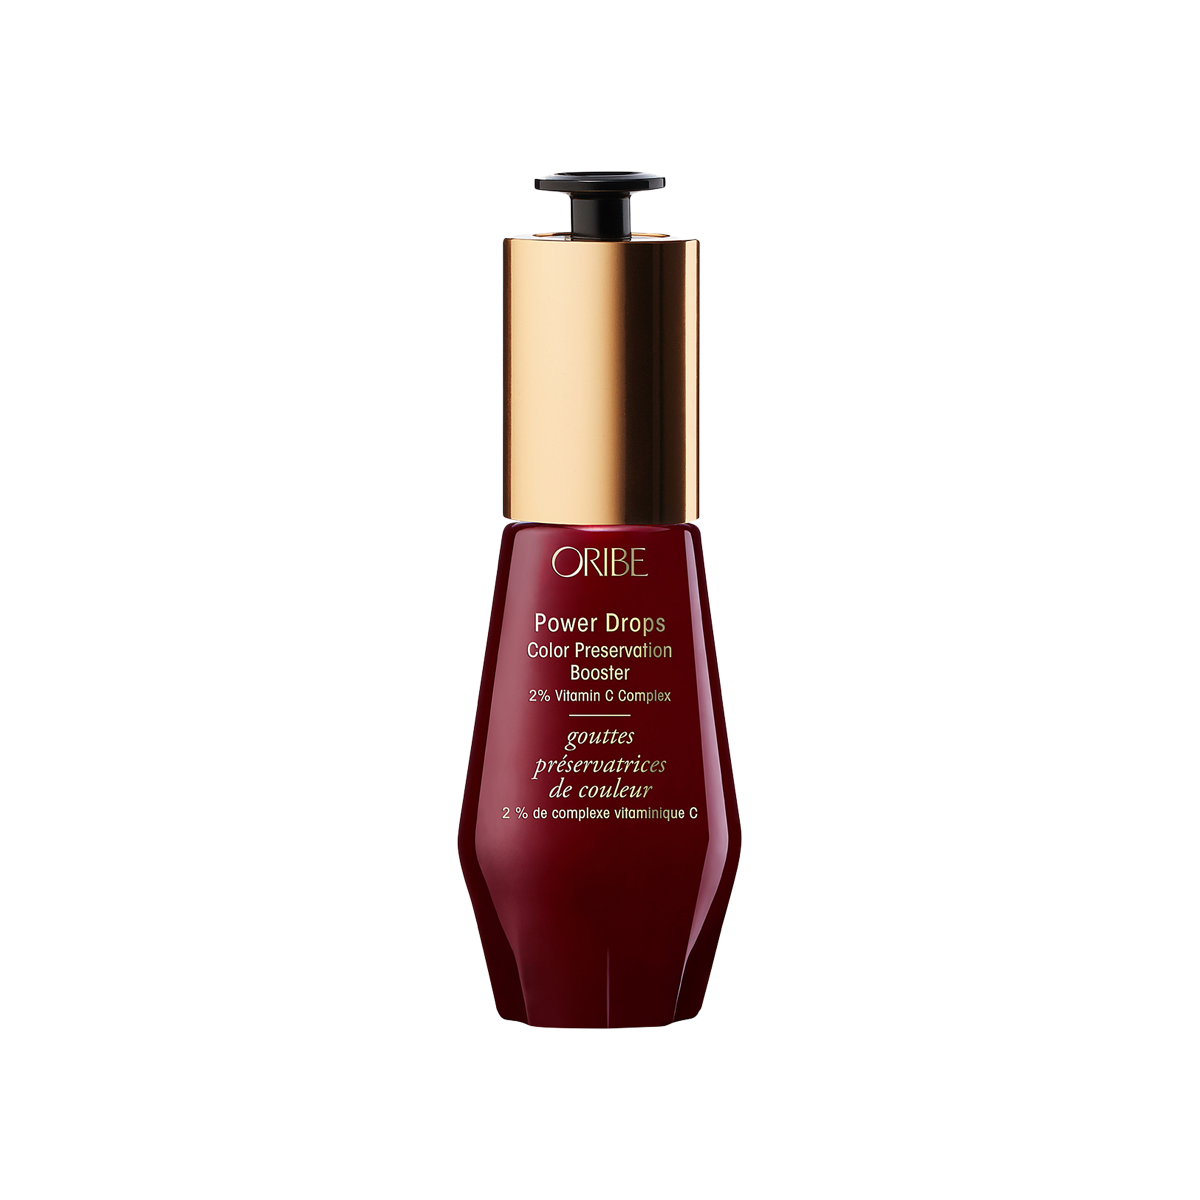 Oribe - Power Drops Color Preservation Booster